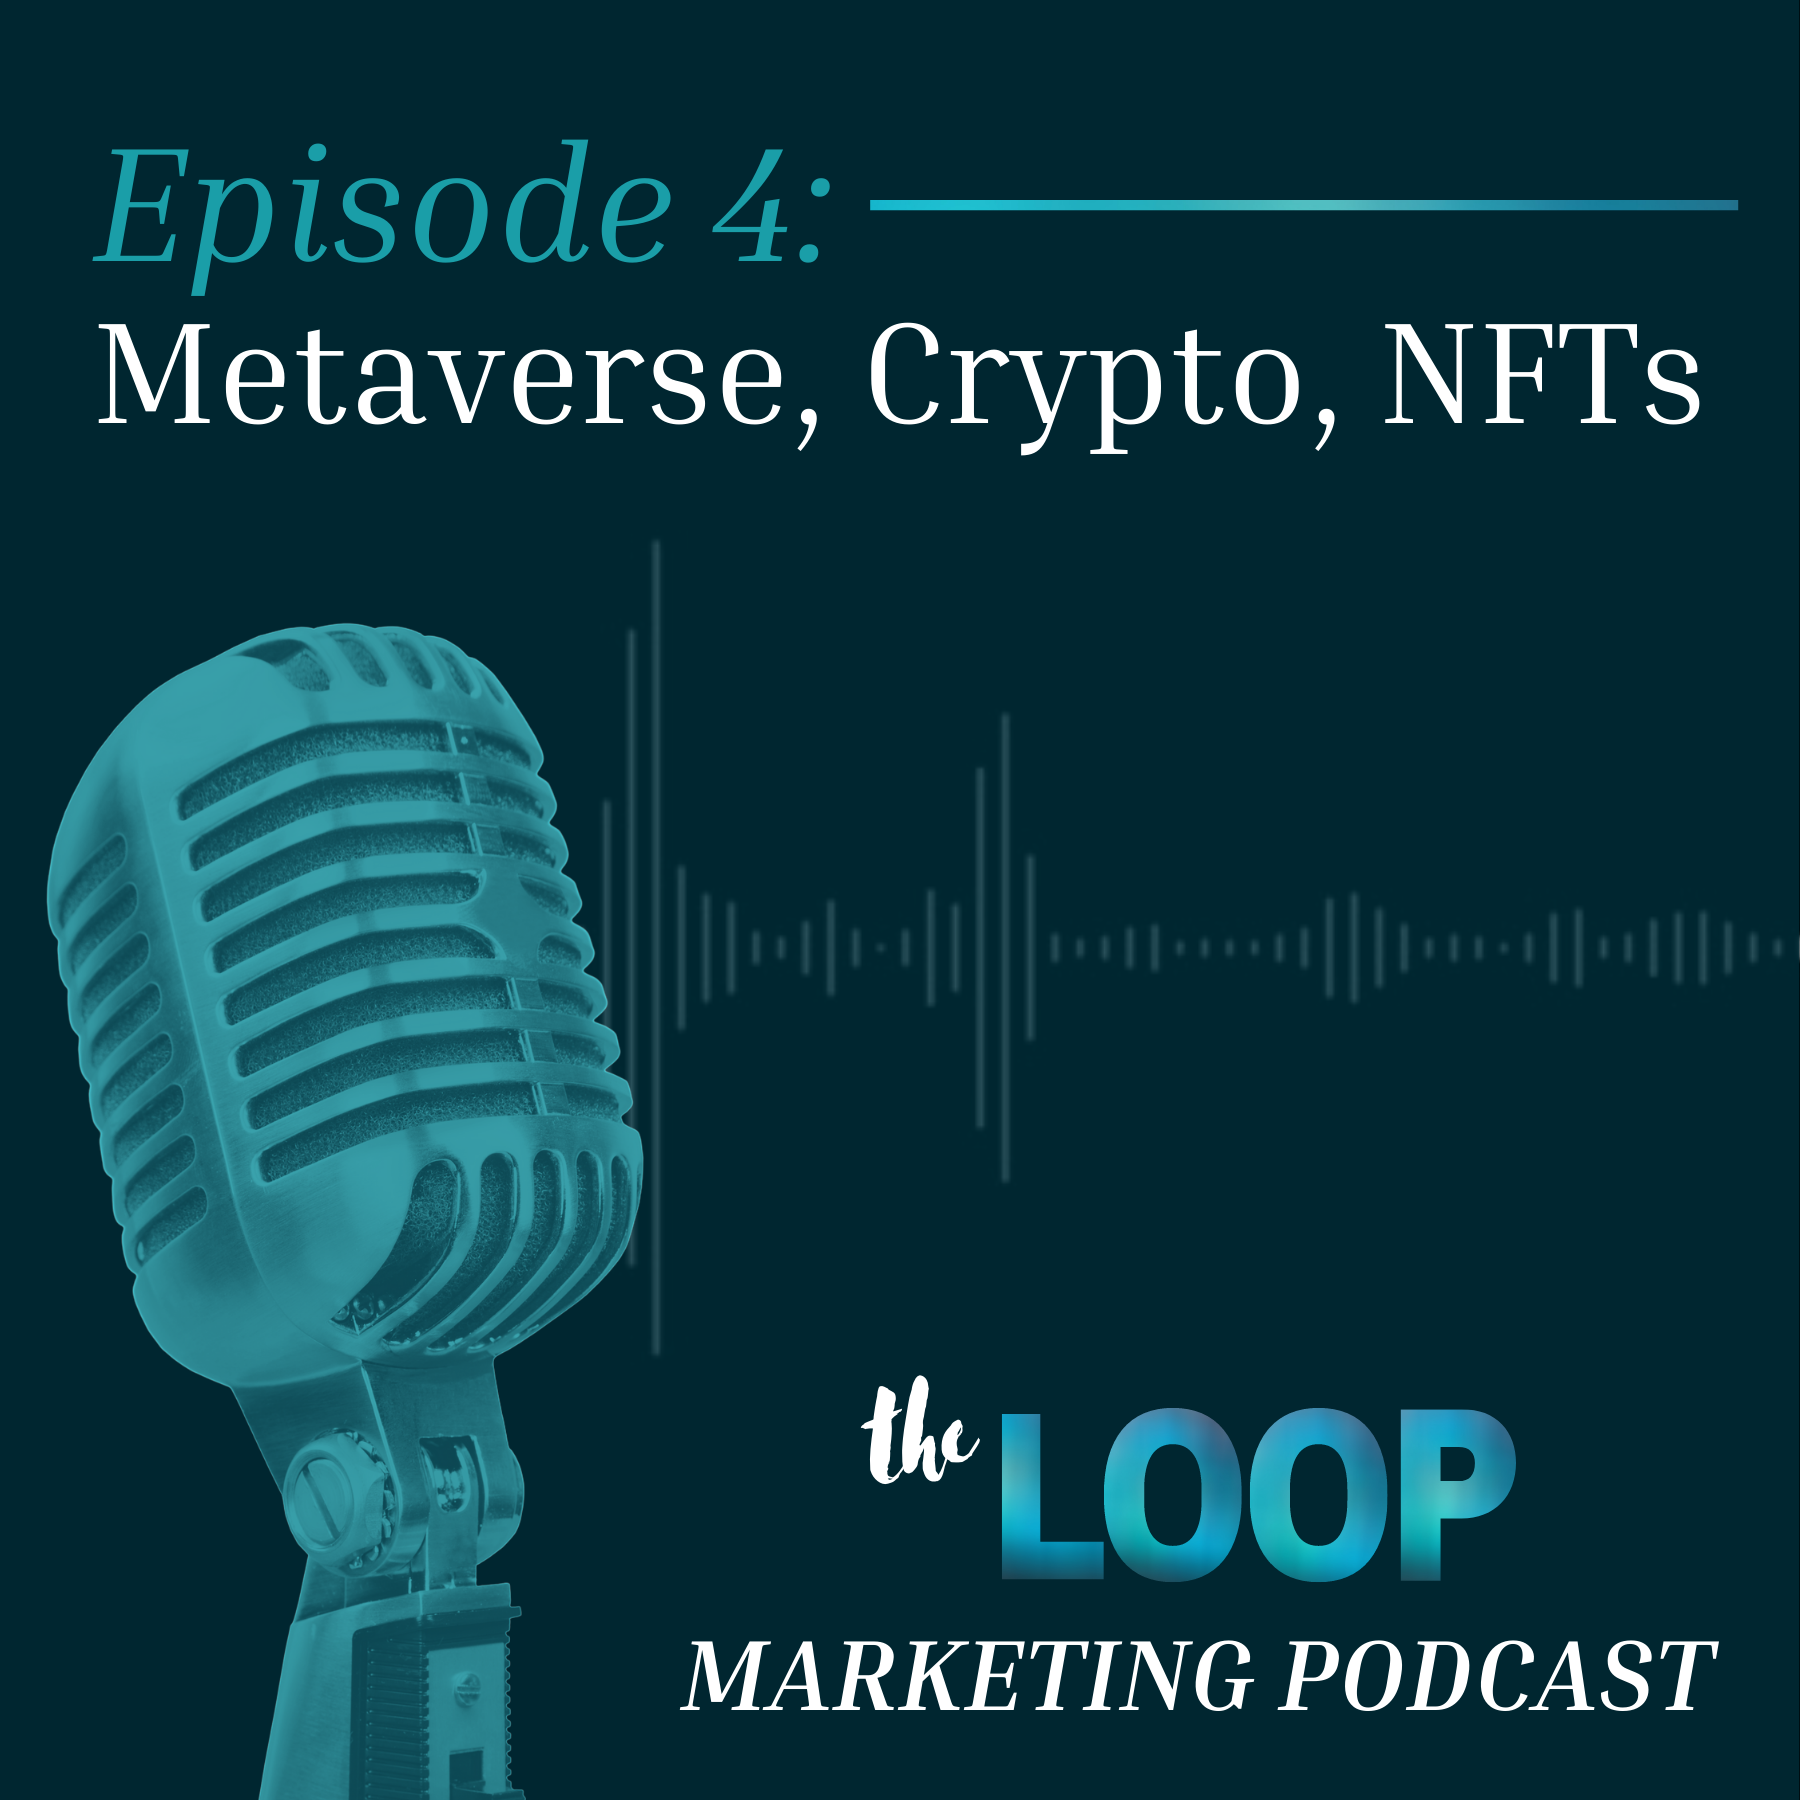 Metaverse, Crypto, and NFTs